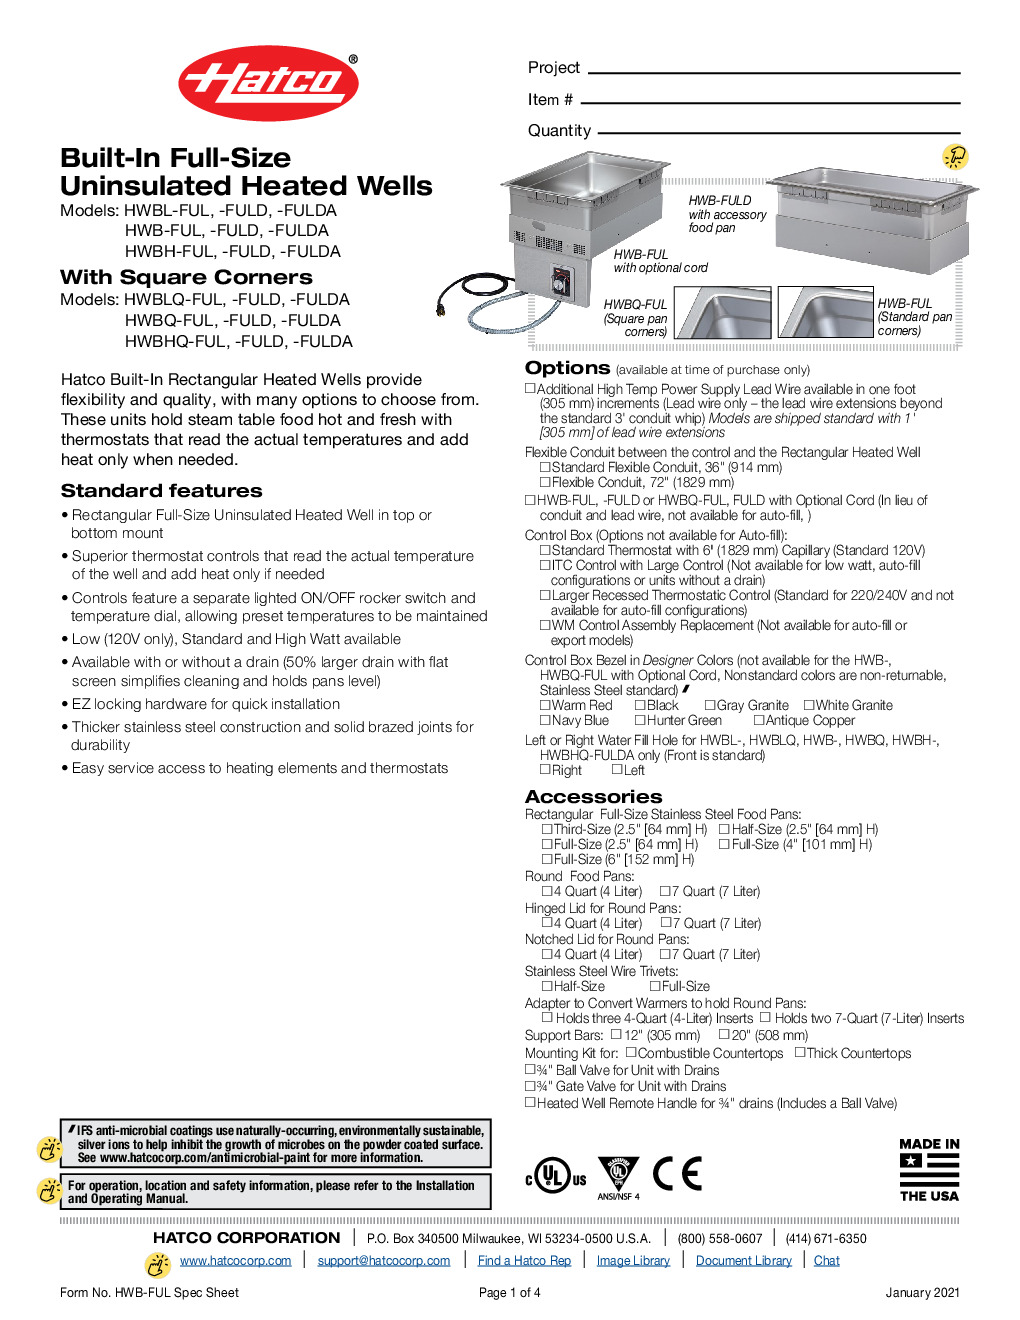 Hatco HWB/L-H/RT-FUL Built-In Full-Size Uninsulated  Heated Wells